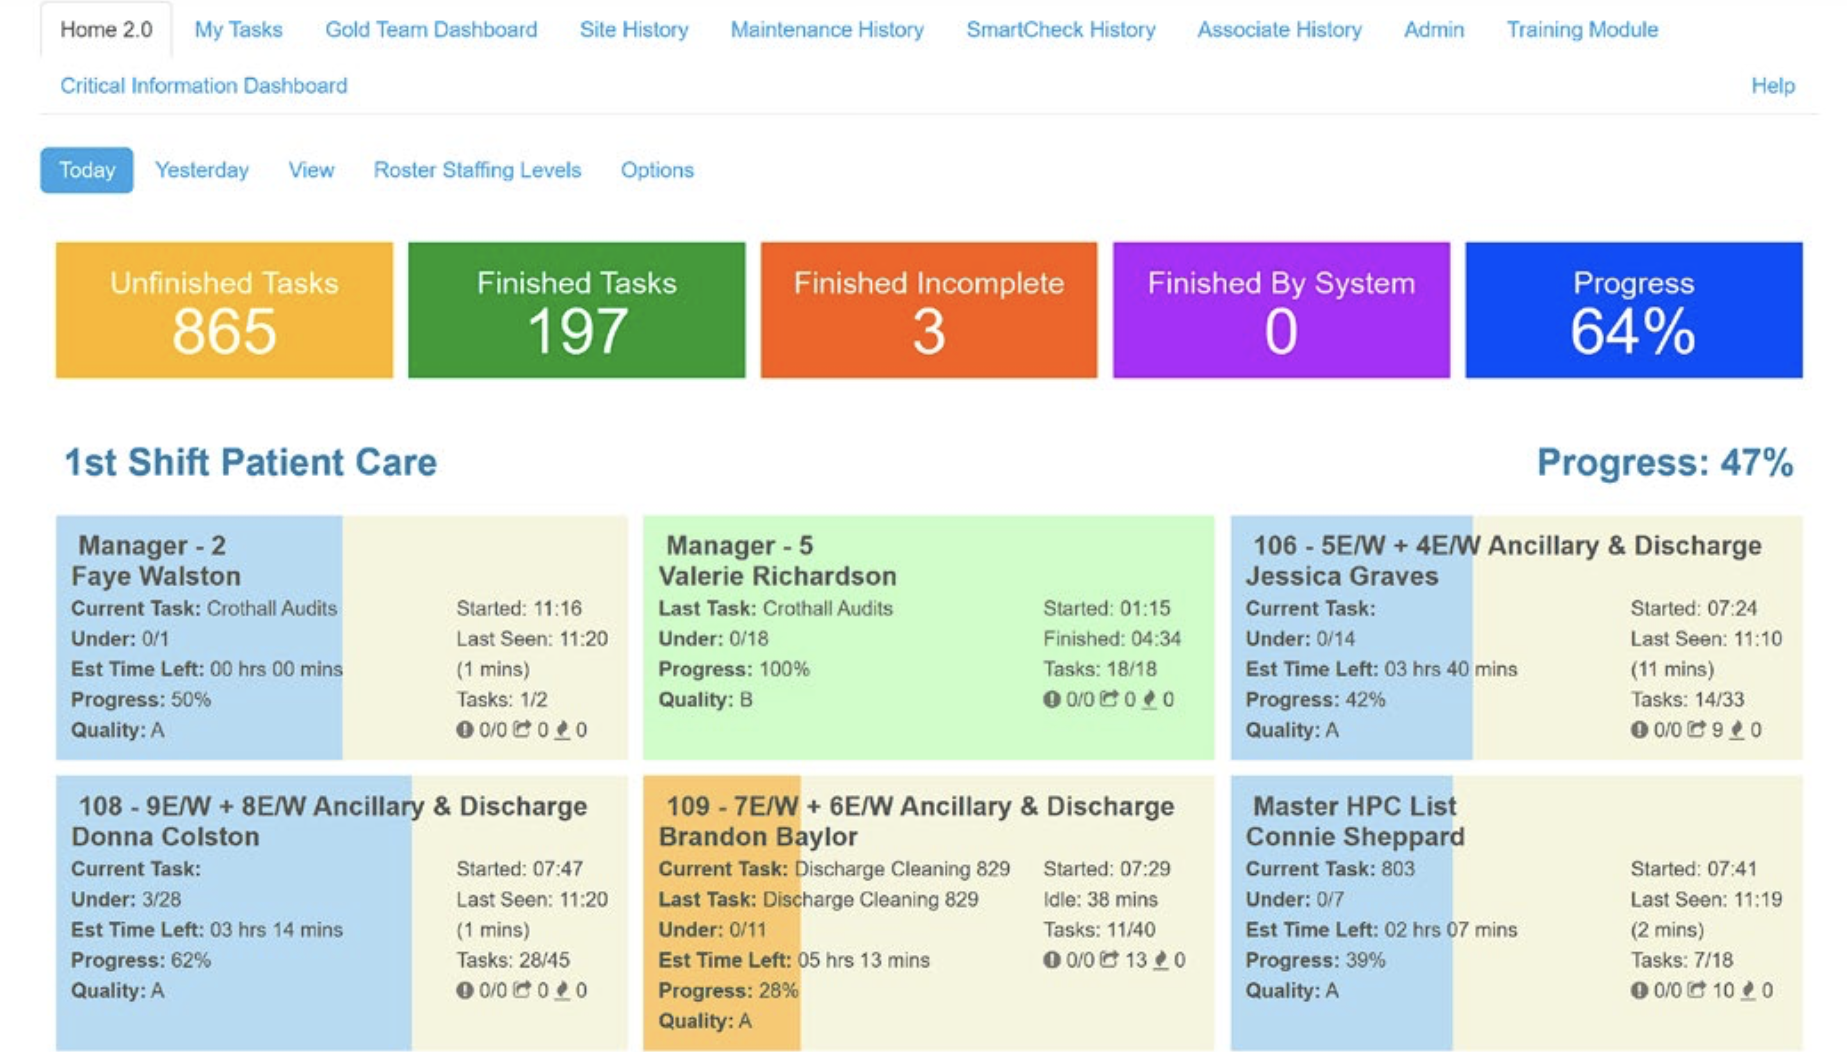 EVS Manager Dashboard which allows EVS Managers to monitor their staff's progress in real-time, prioritize tasks to manage staffing shortages, and identify problematic areas that require attention.